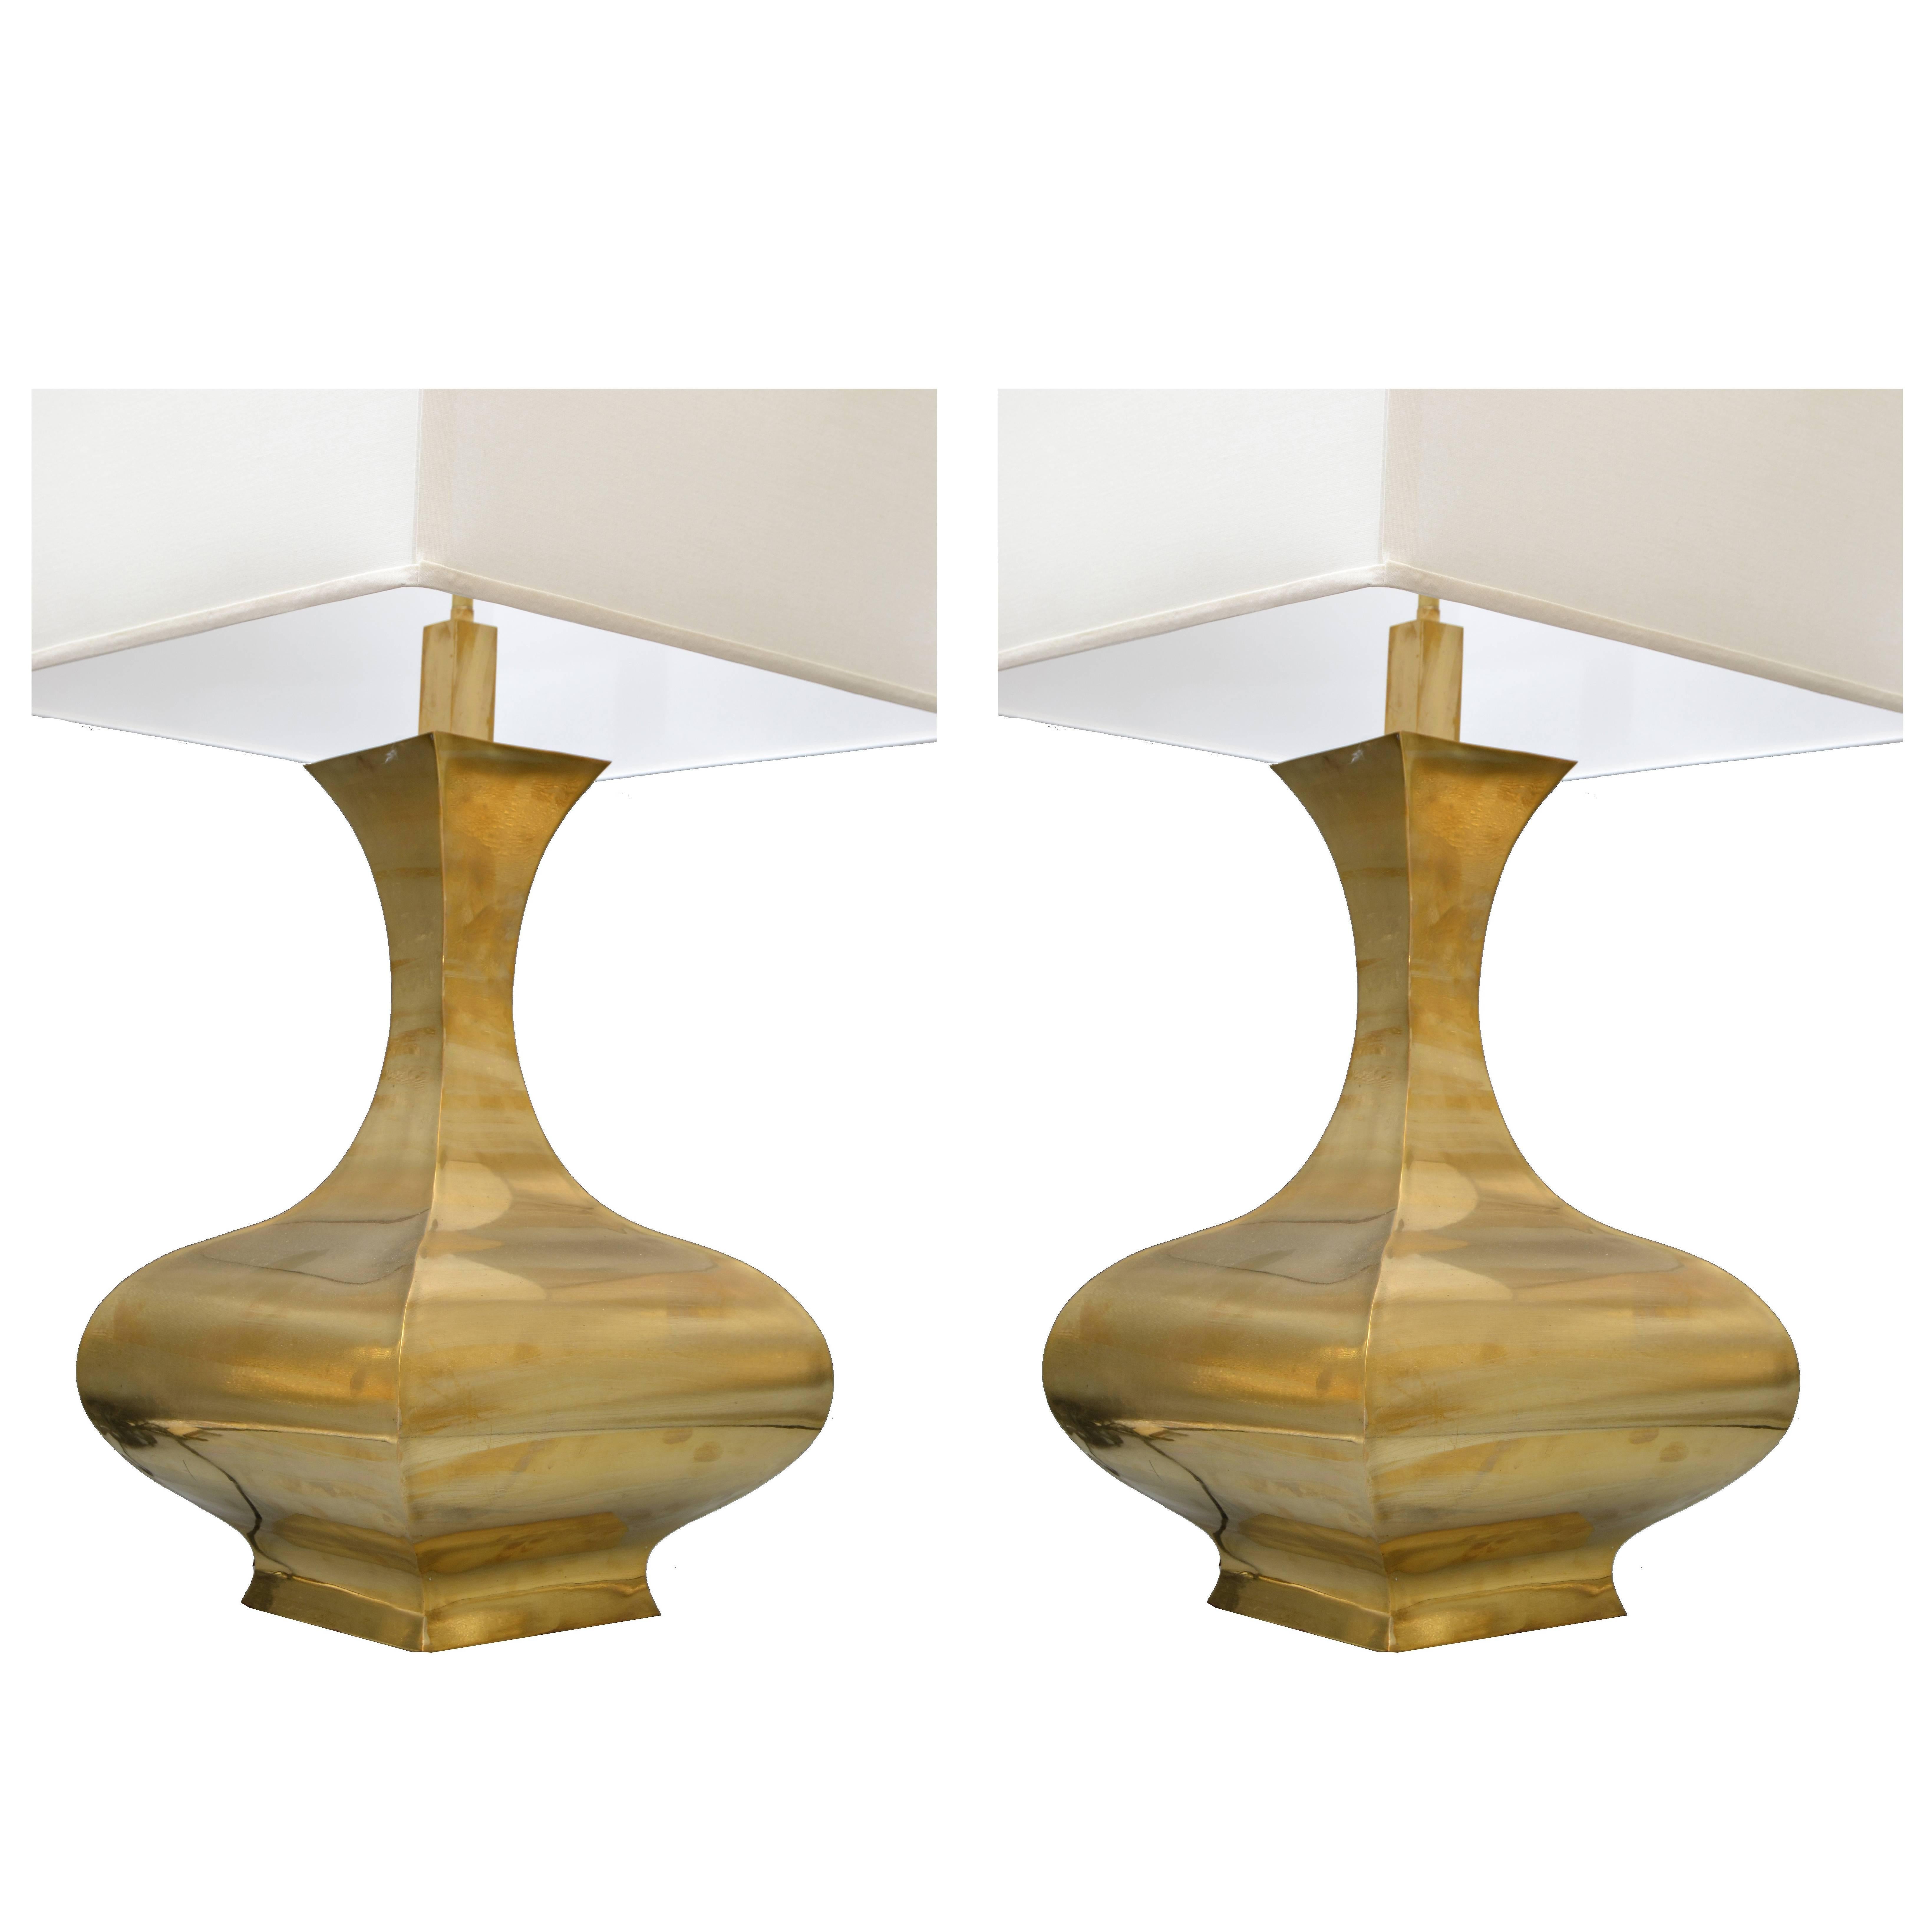 Pair, Tall Solid Brass Vessel Shape Table Lamps Shades Mid-Century Modern 1960s